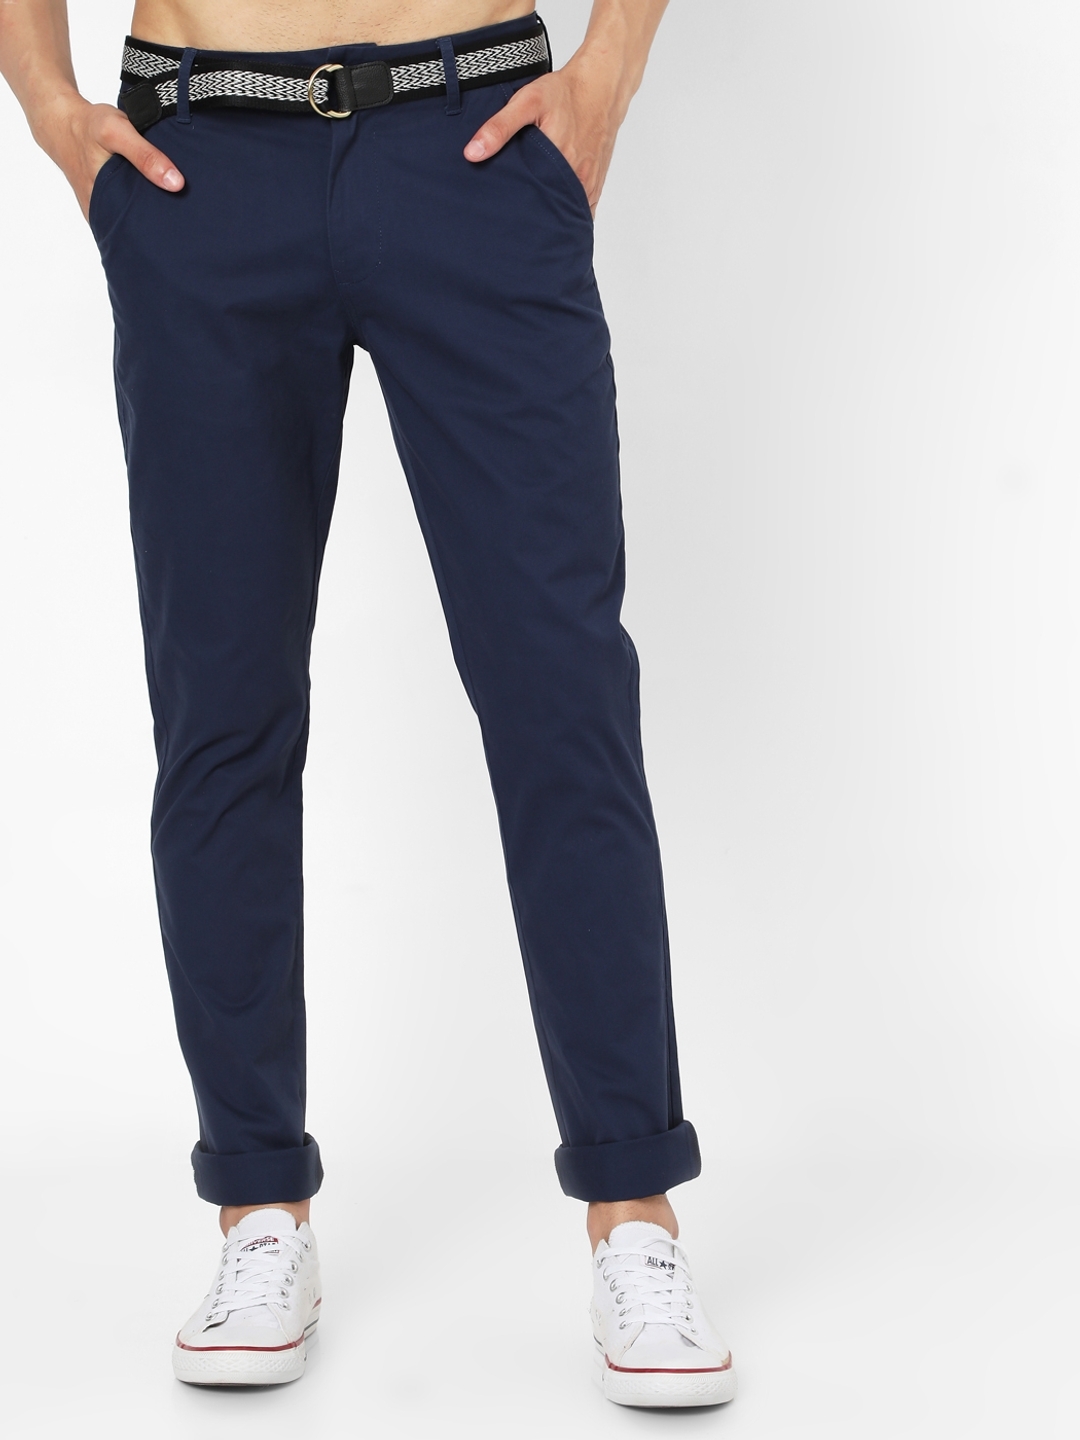 Barnsbury Chino Trousers - Navy Side Stripe | Boden US